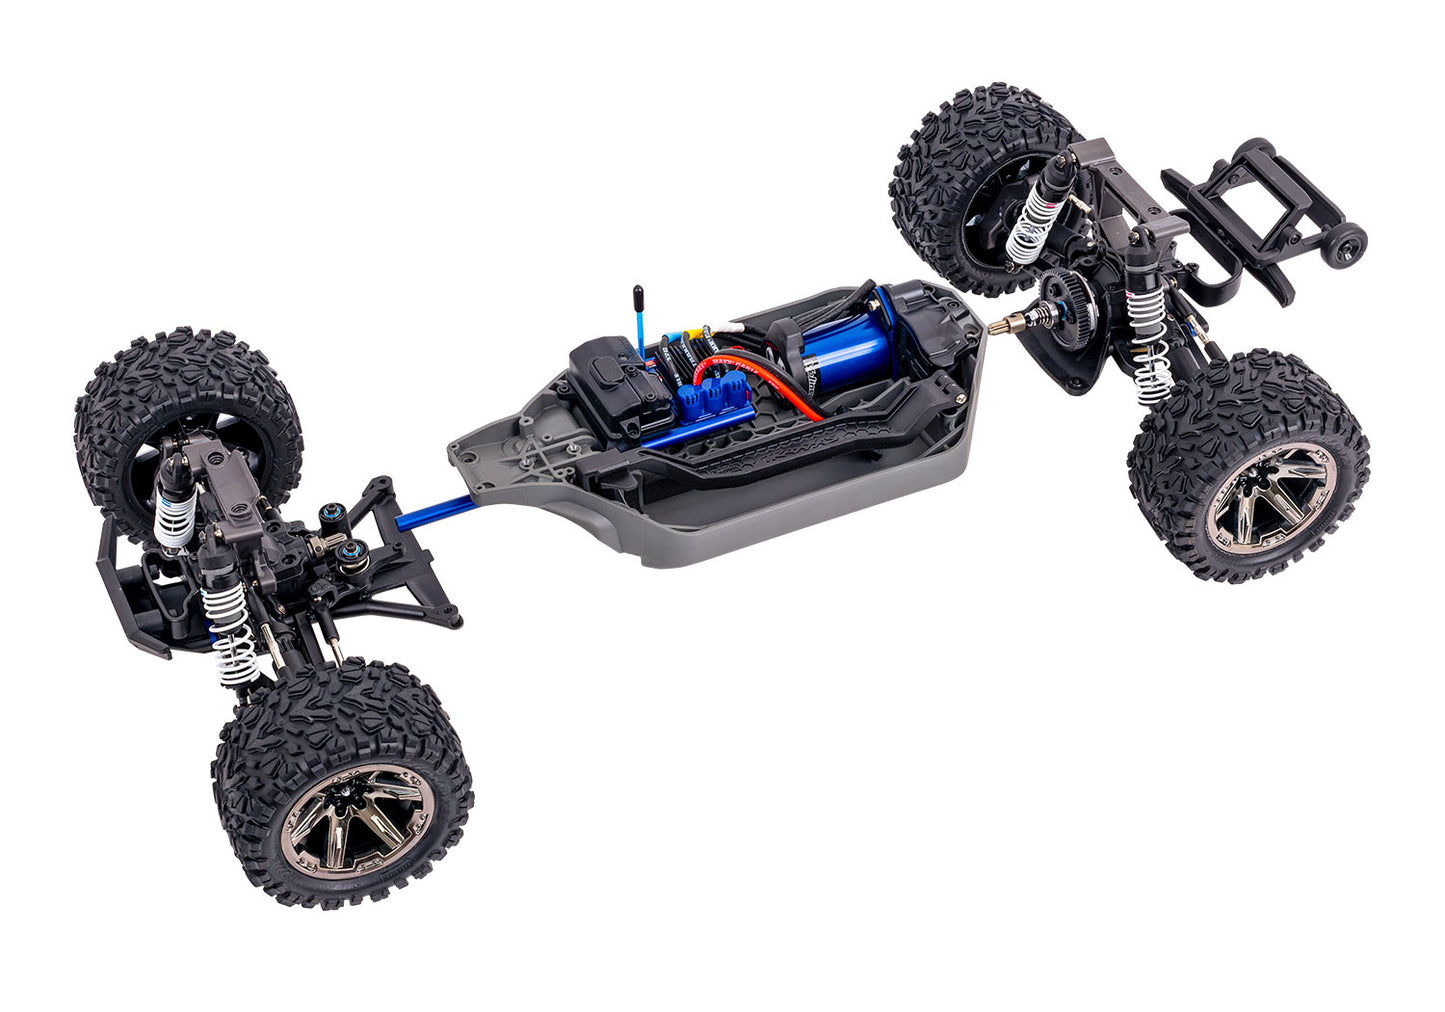 Traxxas 67376-4 GREEN Rustler 4X4 VXL: 1/10 Scale Stadium Truck with TQi™ Traxxas Link™ Enabled 2.4GHz Radio System & Traxxas Stability Management (TSM)®